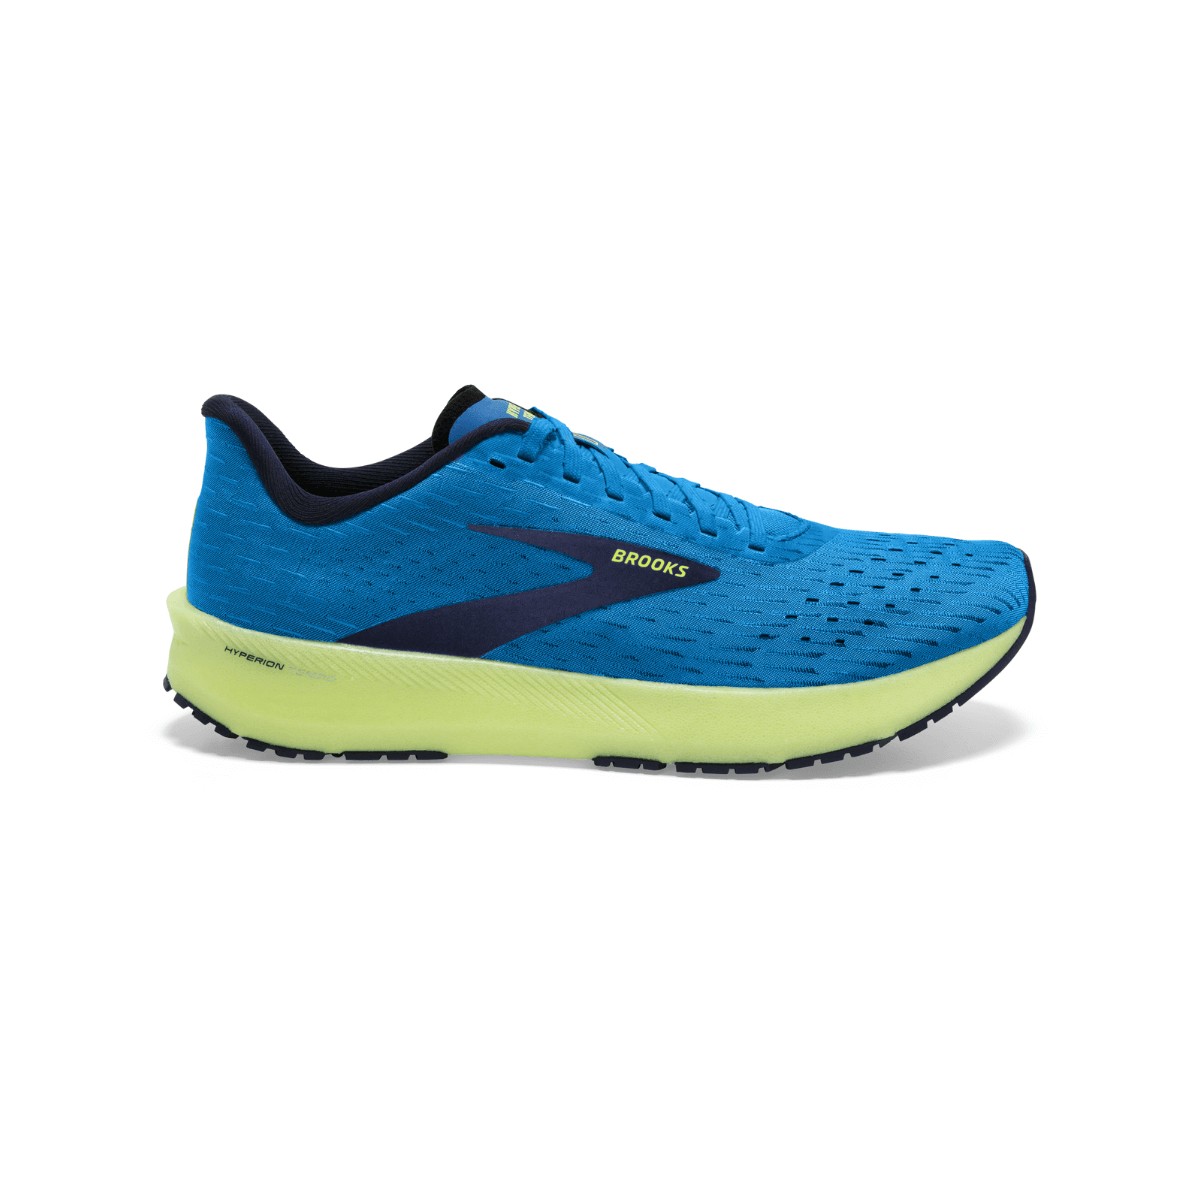 Brooks Hyperion Tempo Shoes Blue Yellow AW21, Size 45,5 - EUR